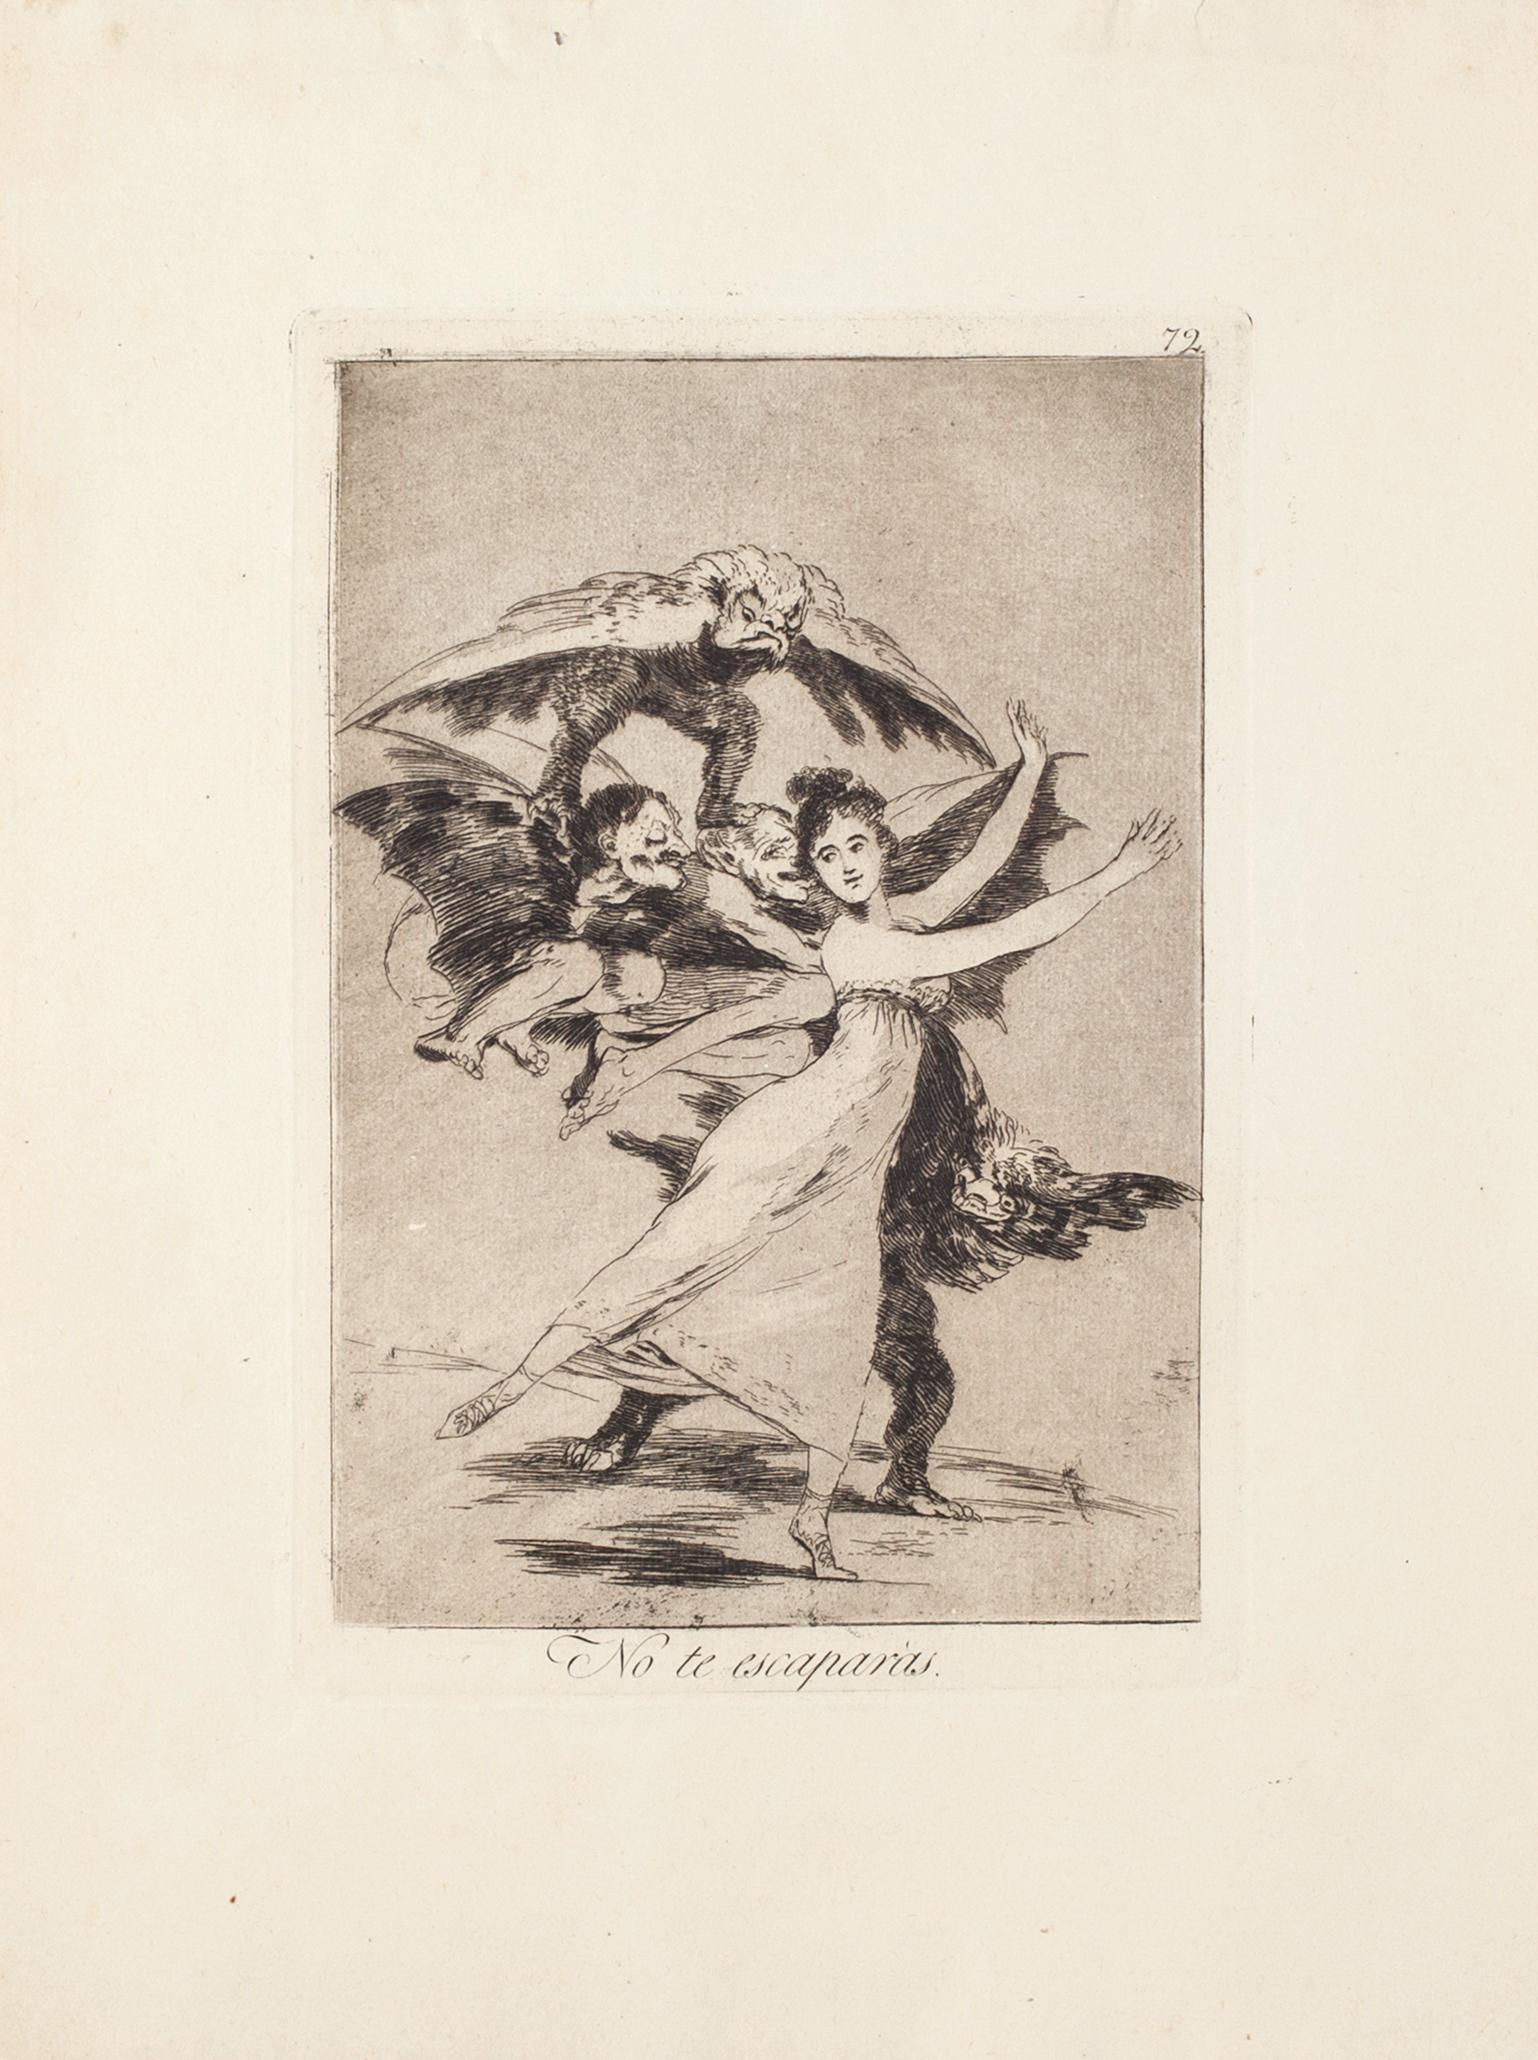 No te escaparas is an original Etching on wove paper realized by the artist Francisco Goya and published for the first time in 1799.

Original Etching on wove paper. Image dimensions: 21.5 x 14.5 cm.

The etching is part of the Third Edition of 